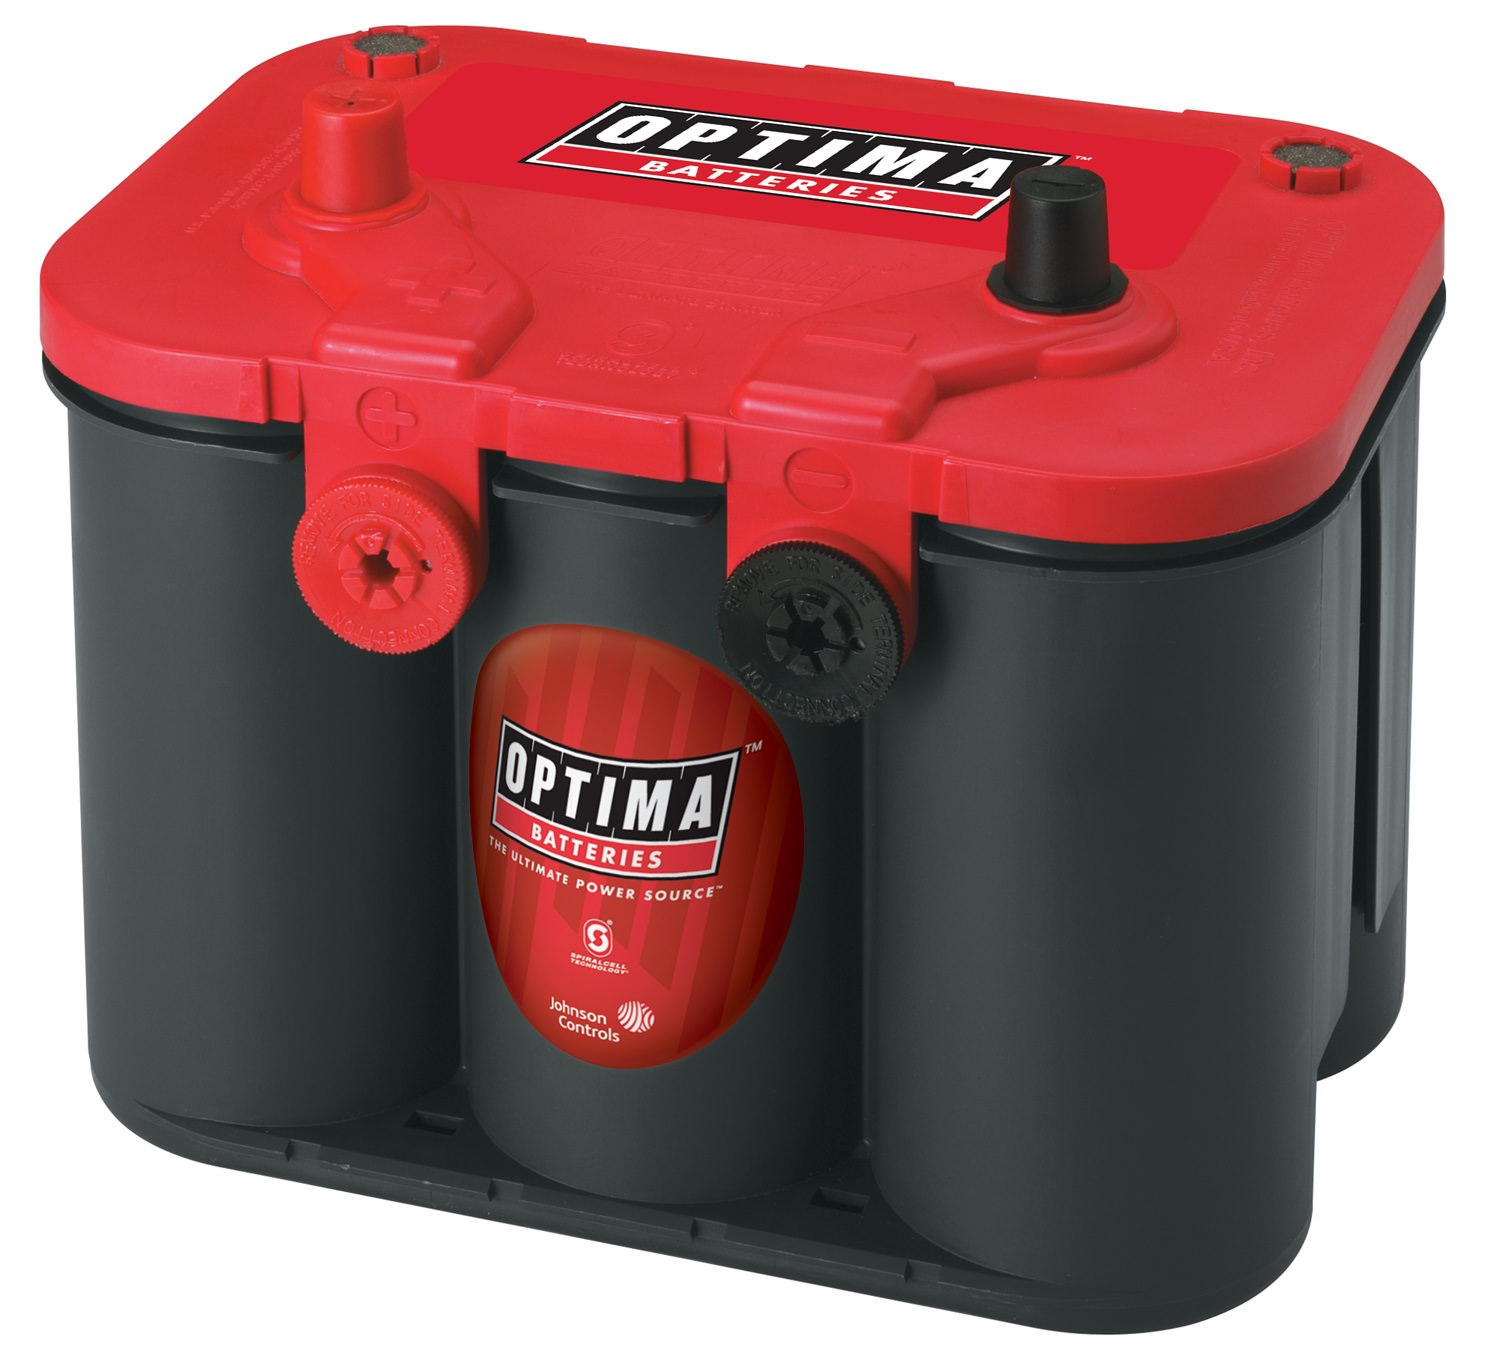 OPTIMA RedTop AGM Spiralcell Automotive Starting Battery, Group Size 34/78, 12 Volt 800 CCA - image 2 of 7